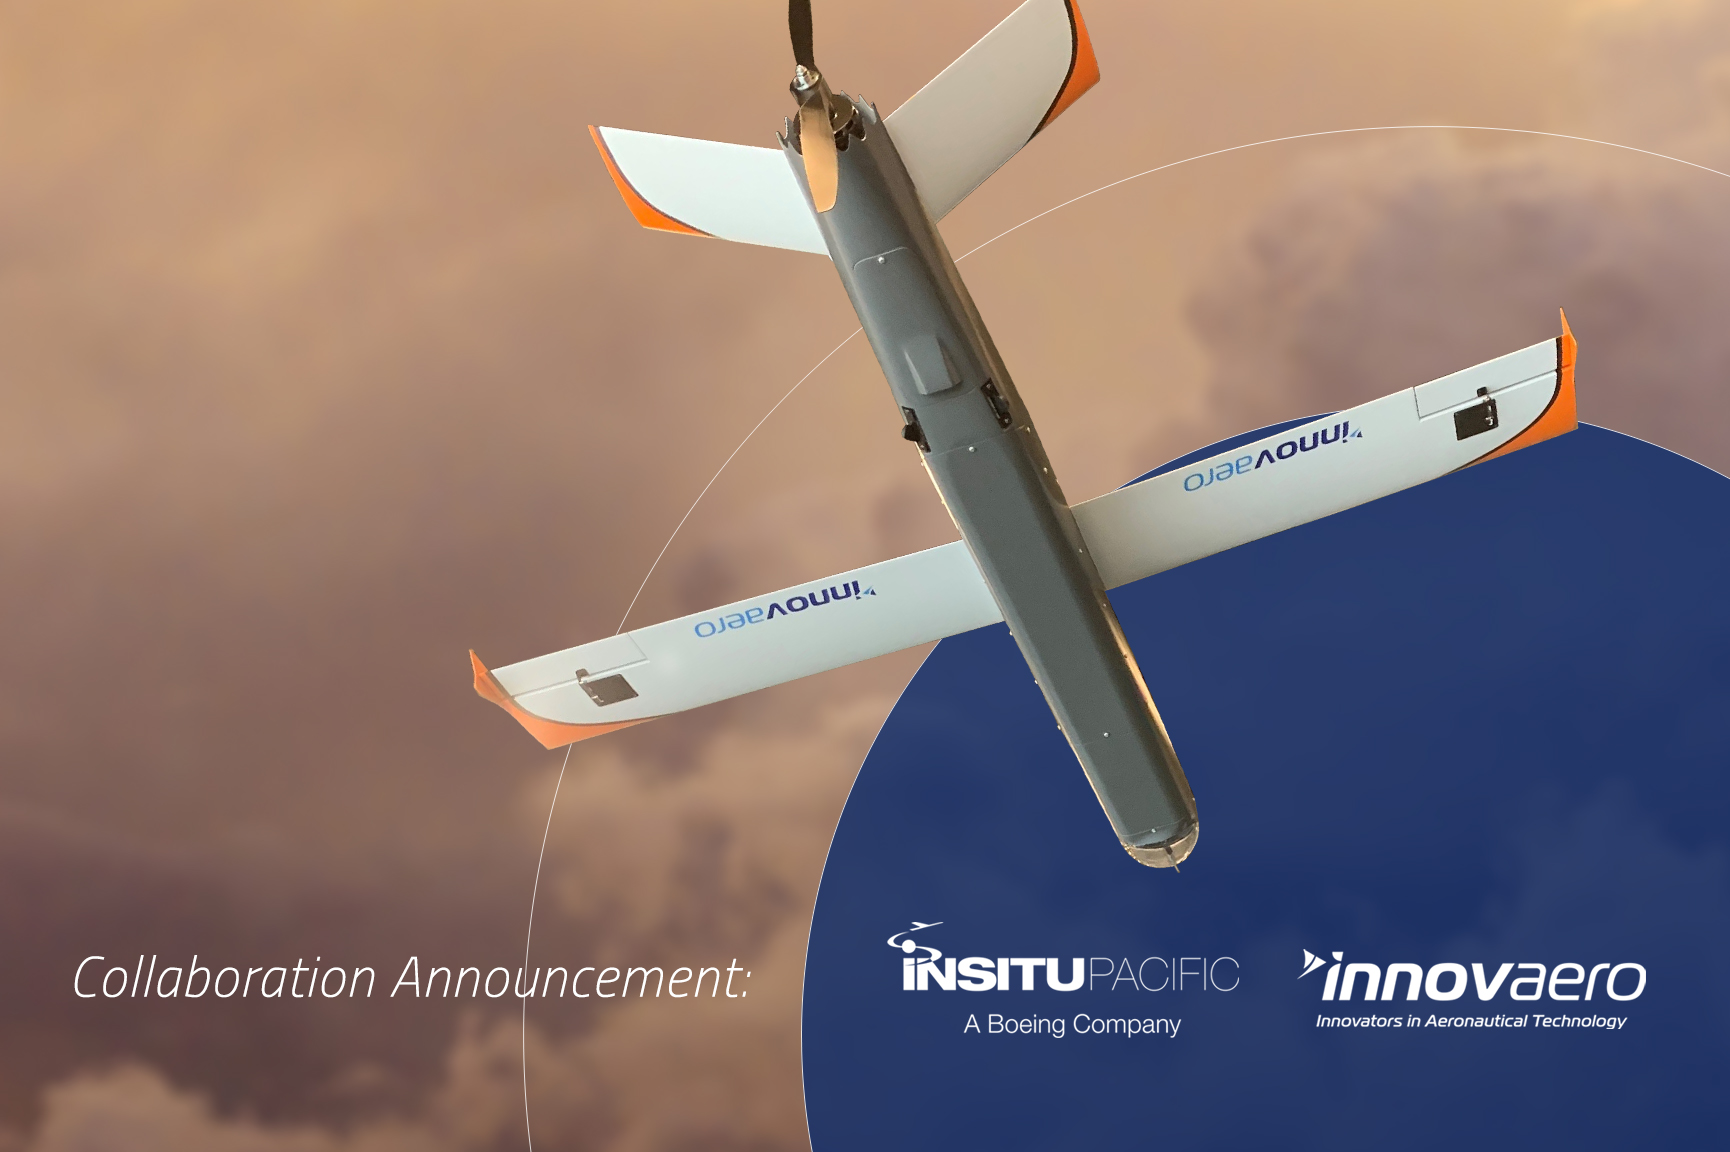 Innovaero and Insitu Pacific's collaboration announcement graphic showing the OWL-B image on colourful cloud background.